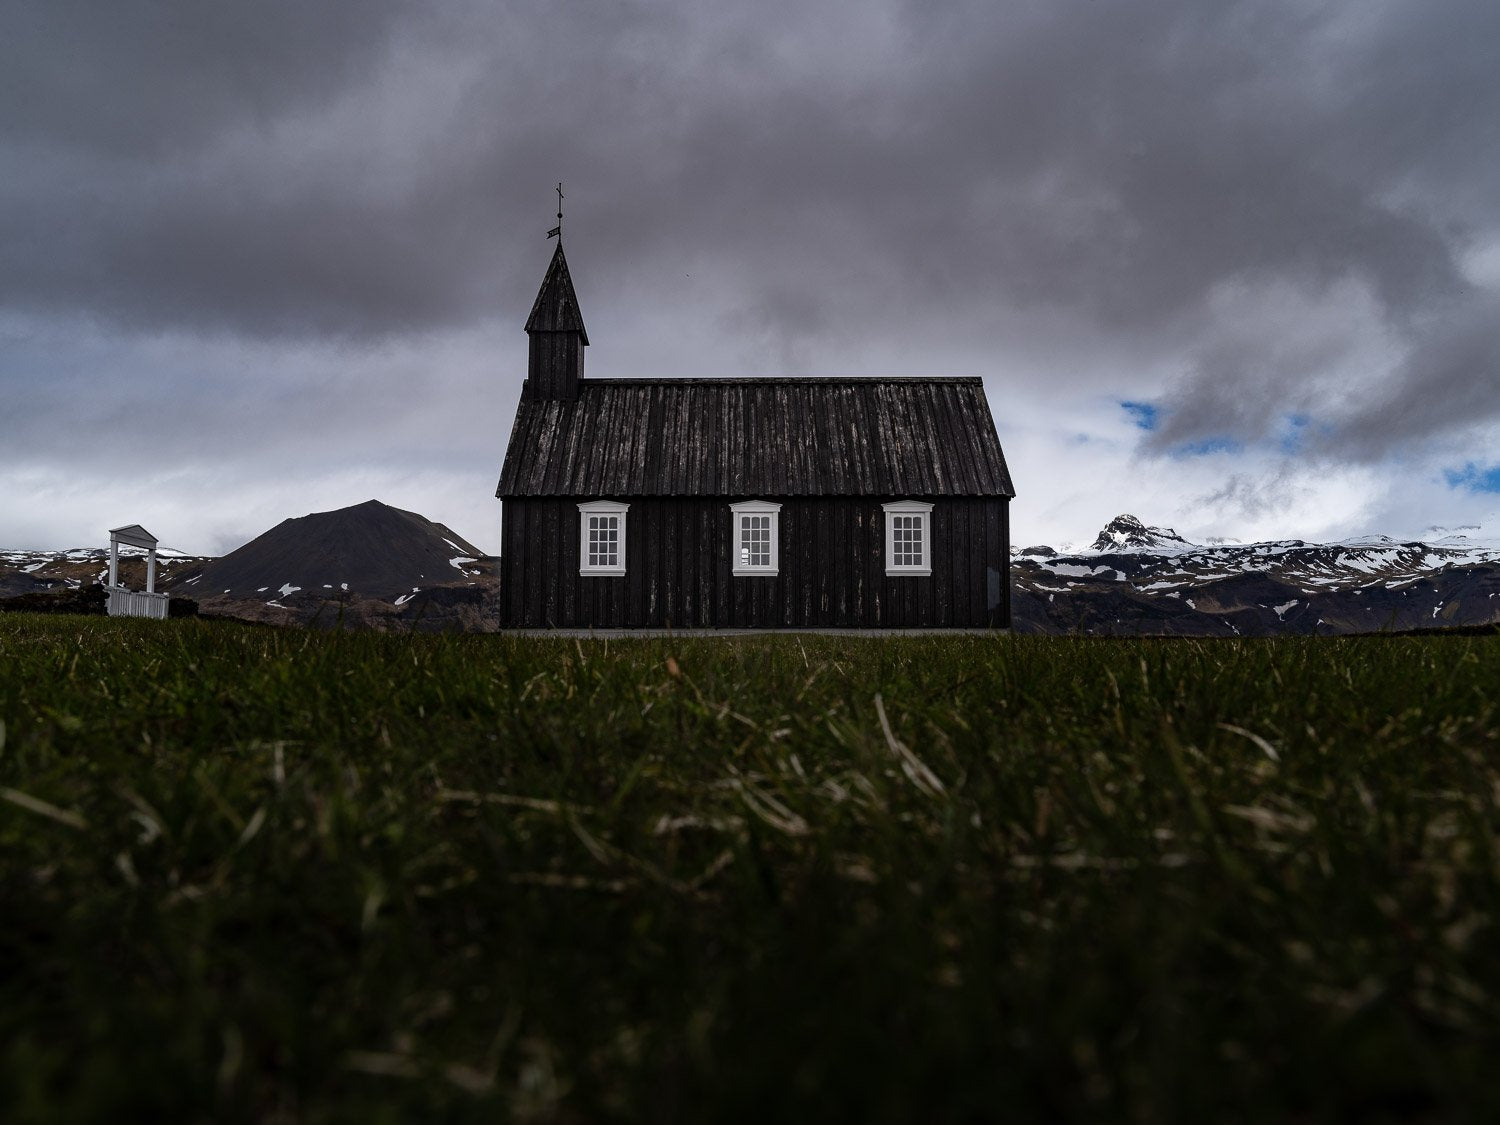 A house in a park and some heavy rain clouds over it, Iceland #29